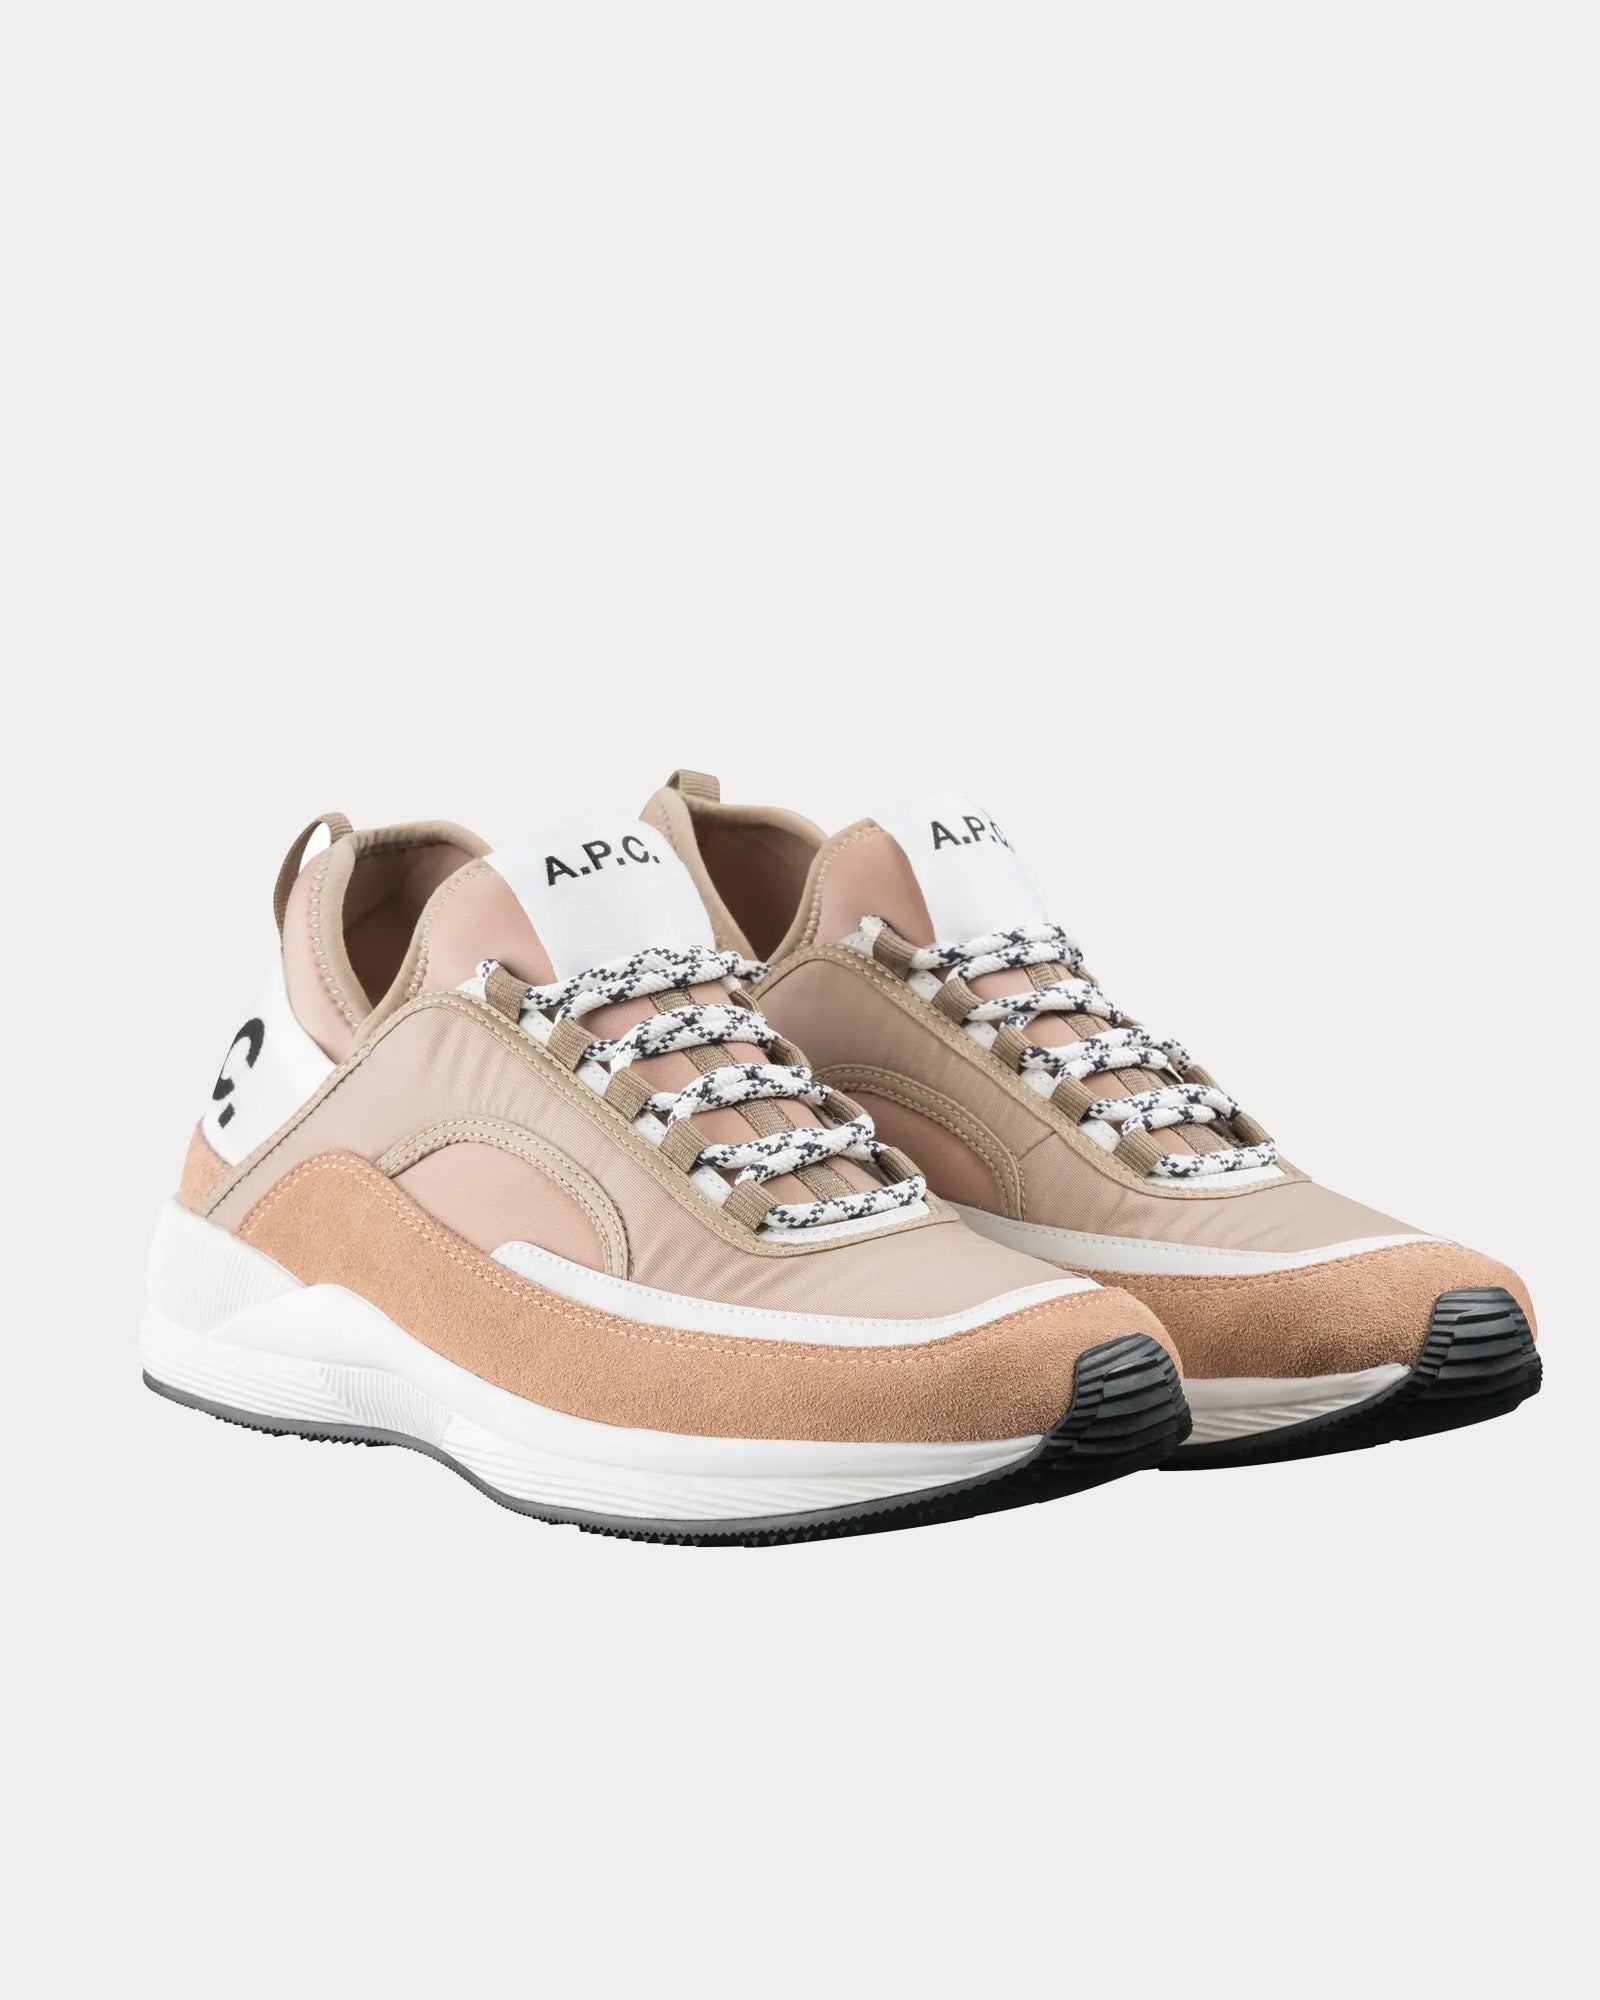 A.P.C. - Run Around Taupe Low Top Sneakers